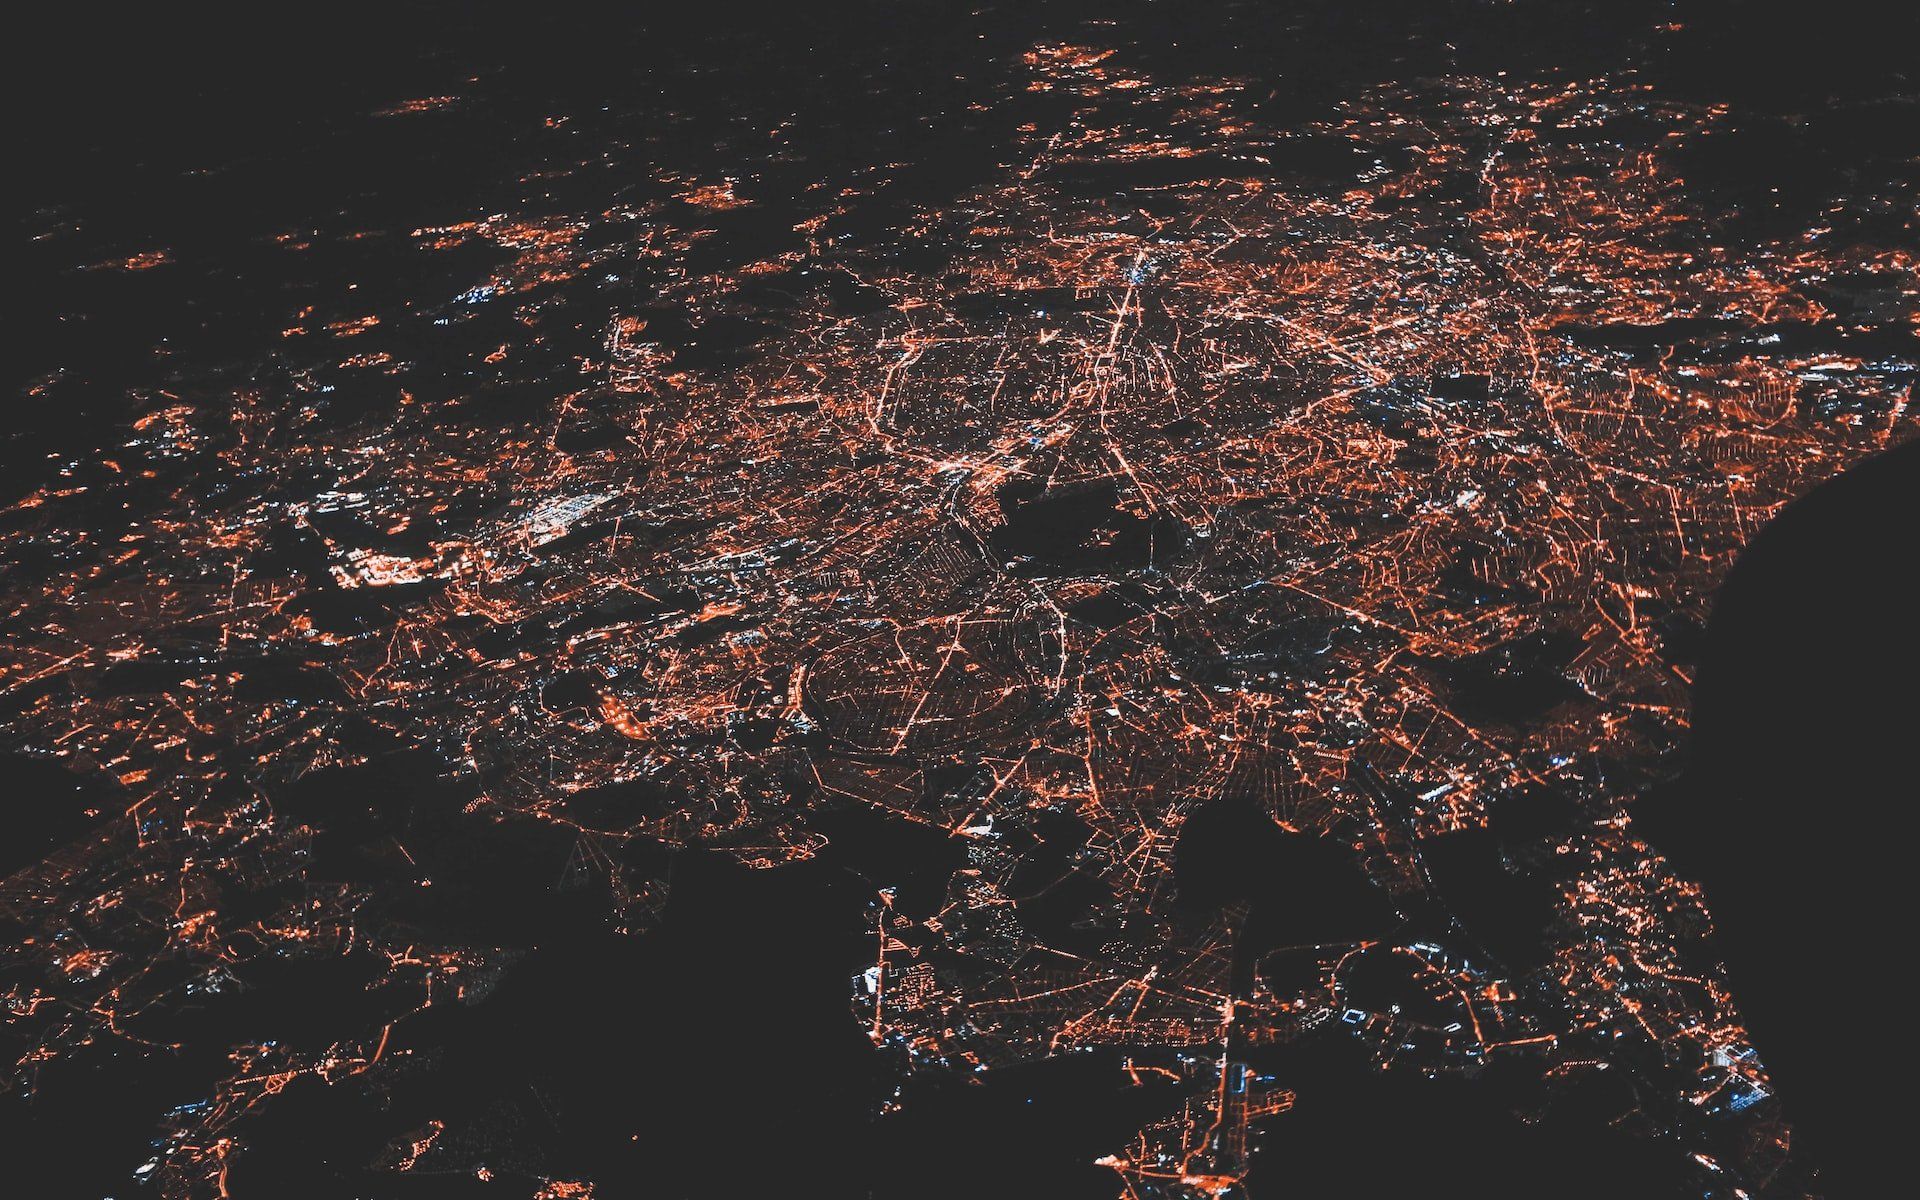 Image of city lights from the sky, showing how connected we are via technology